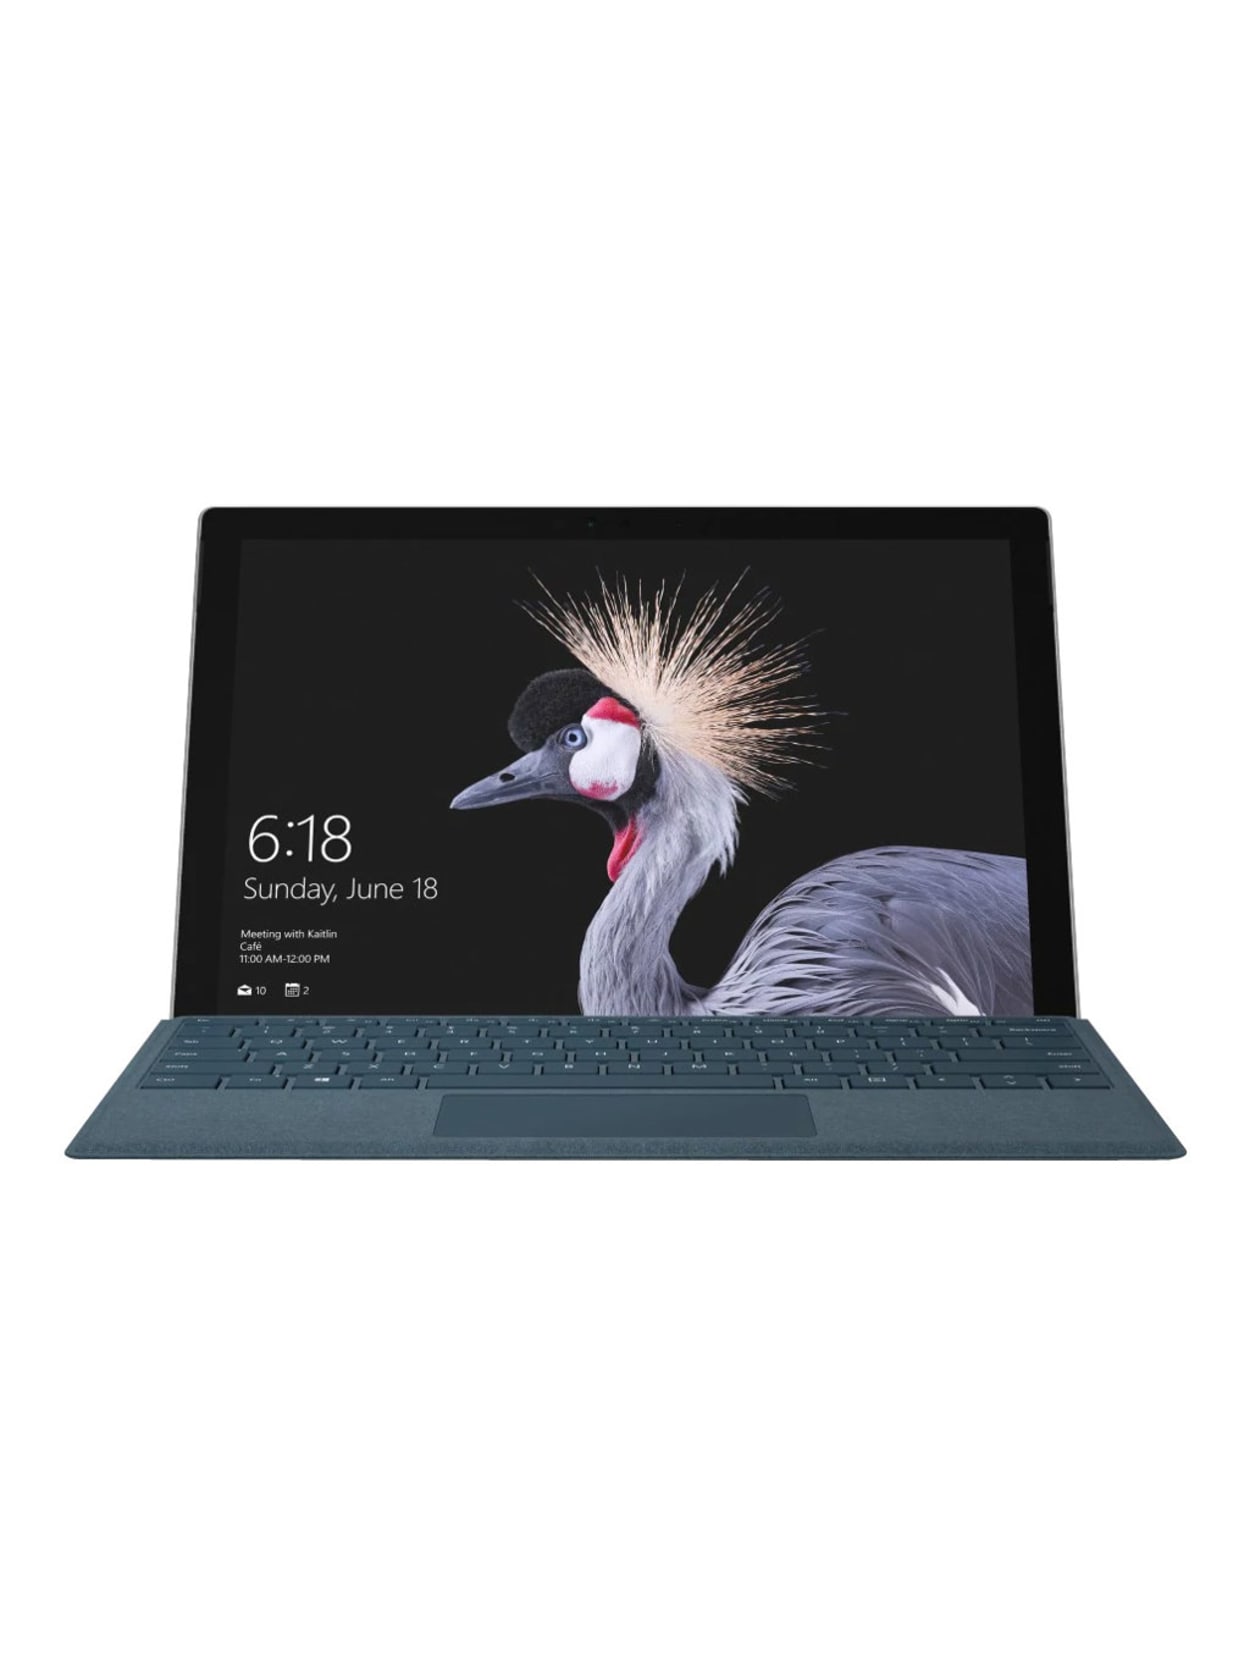 Microsoft Surface Pro Tablet With Detachable Keyboard Core M3 7y30 1 Ghz Win 10 Pro 64 Bit 4 Gb Ram 128 Gb Ssd 12 3 Touchscreen 2736 X 14 Hd Graphics 615 Wi